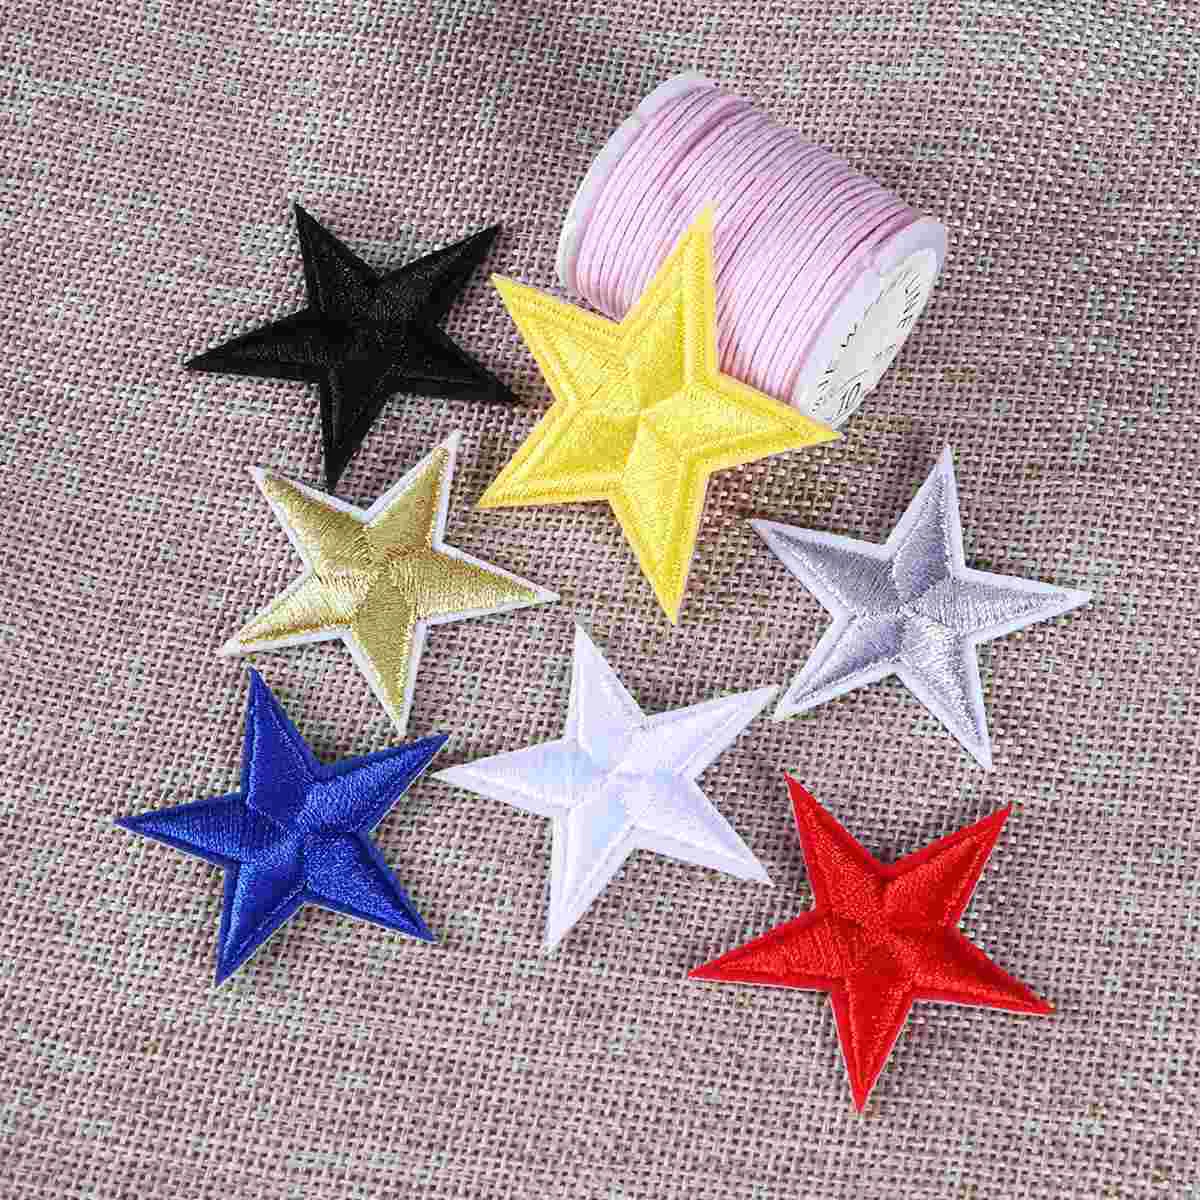 

Patch Star Patches Clothing Iron Embroidery Applique Sticker Diy Sew Sewing Embroidered Clothes Pentagram Gold Appliques Stars